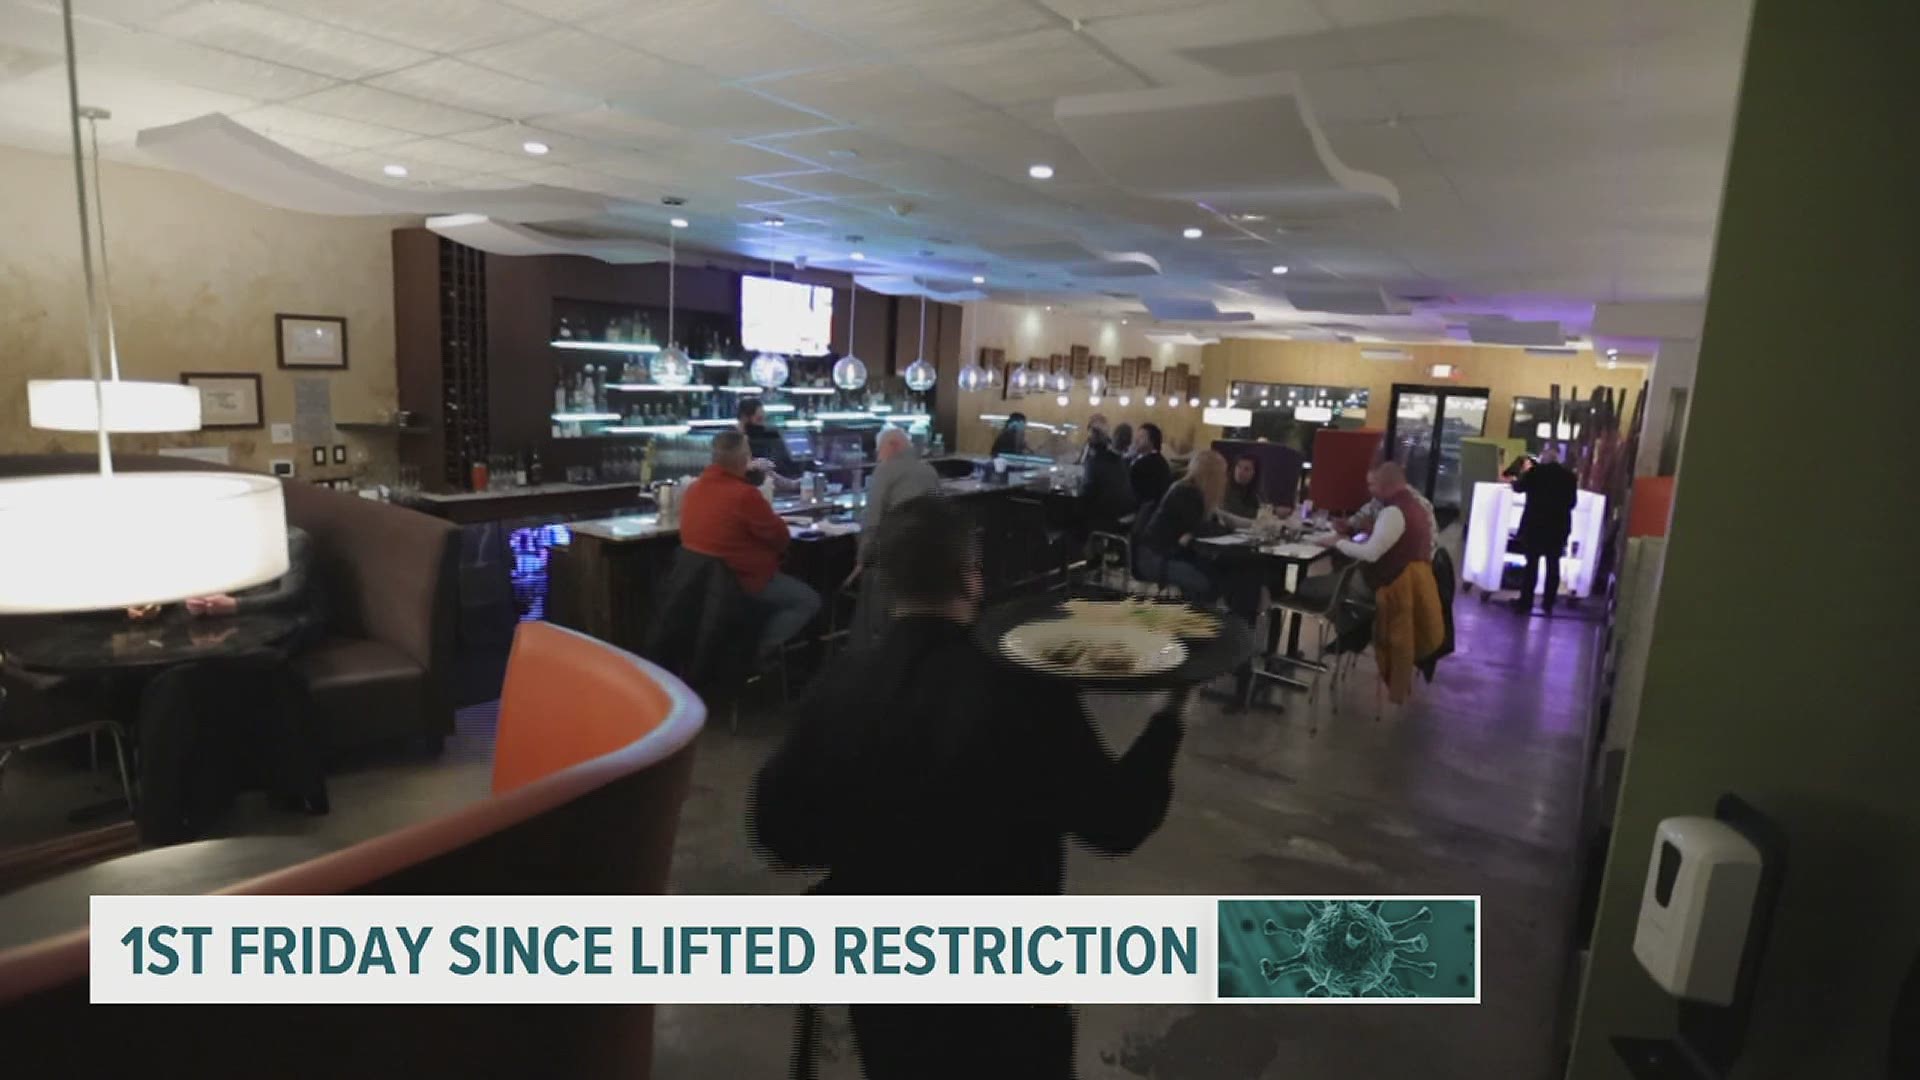 Indoor dining restrictions have been lifted and restaurant owners are eager for business turnout into the weekend.